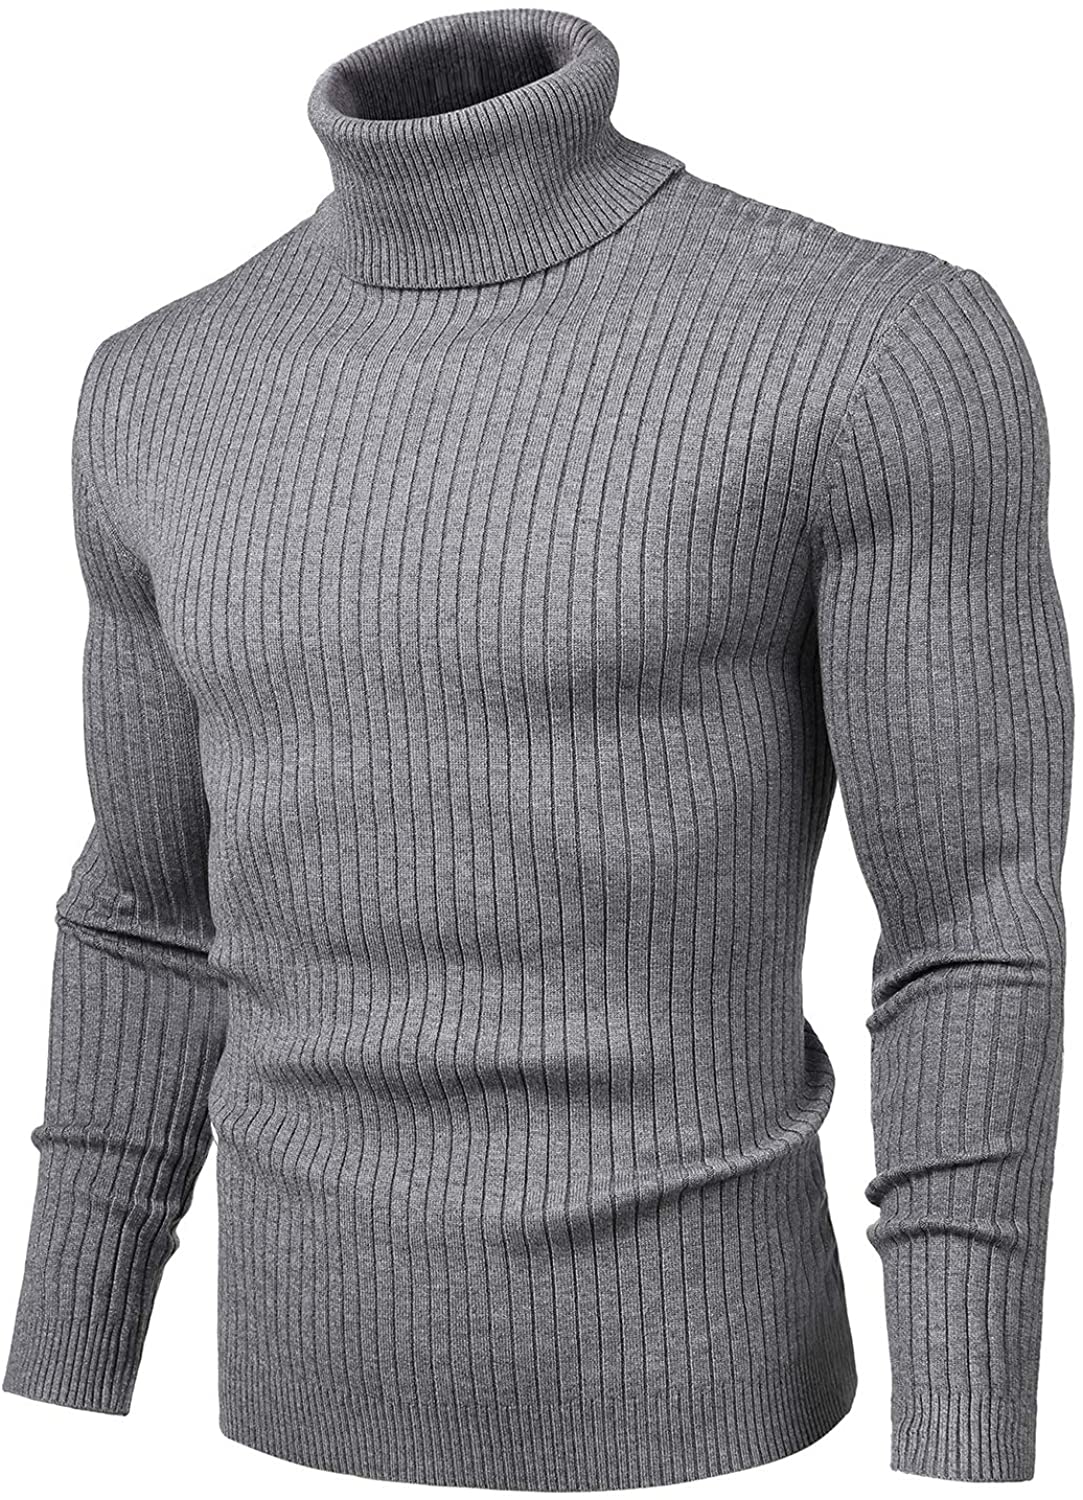 Yayu Mens Slim Fit Stretchy Fashion Solid Turtleneck Knitted Pullover Sweaters